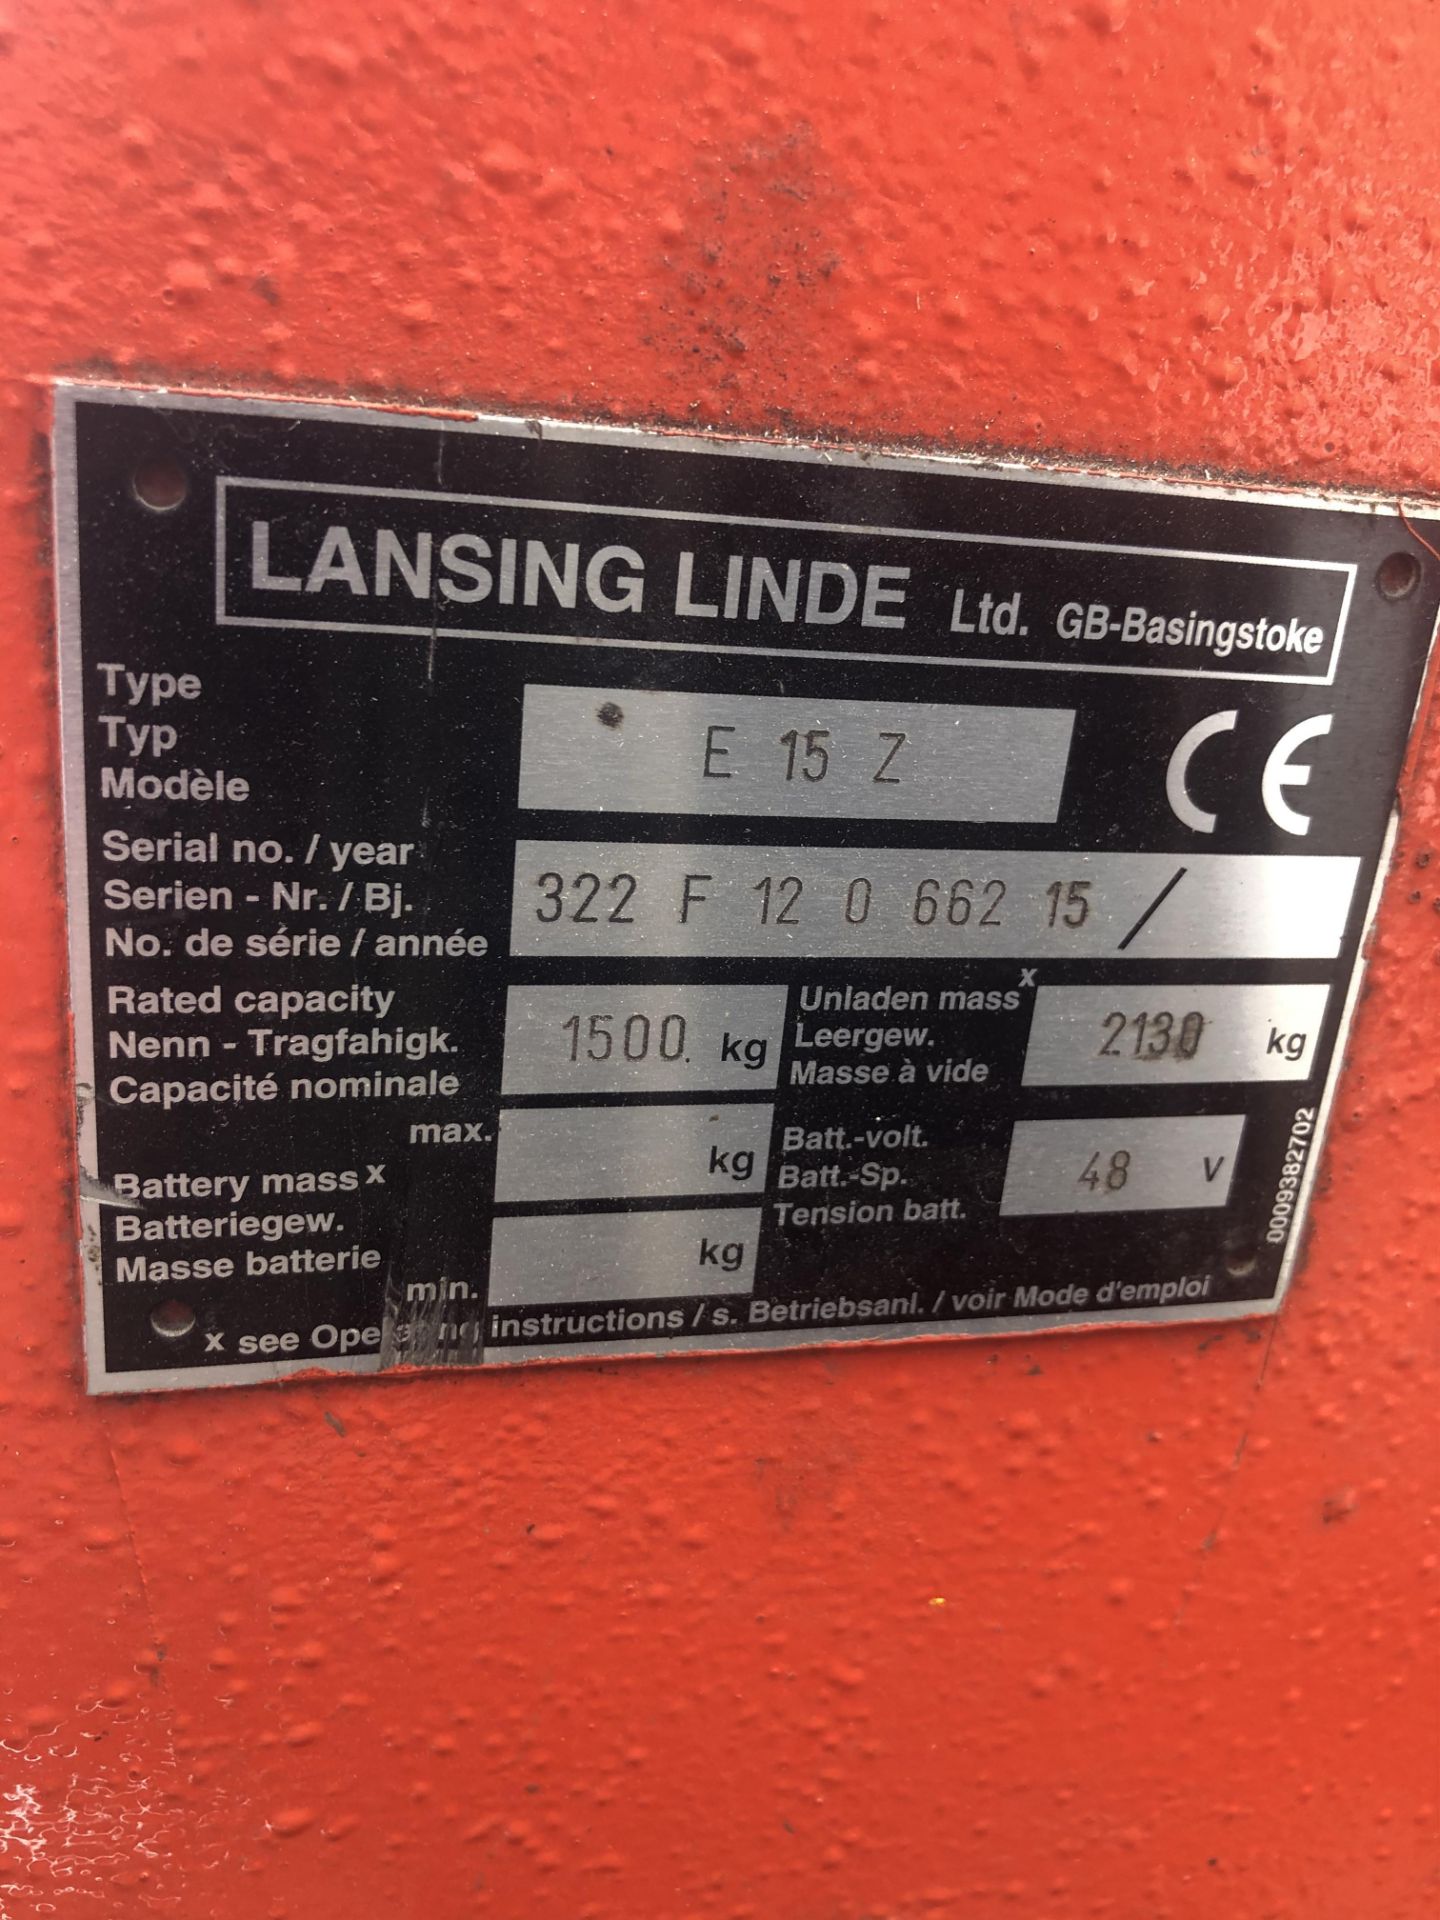 Lansing linde type E15Z electric 3 wheel forklift truck, with side shift cap: 1500kg, max lift - Image 6 of 7